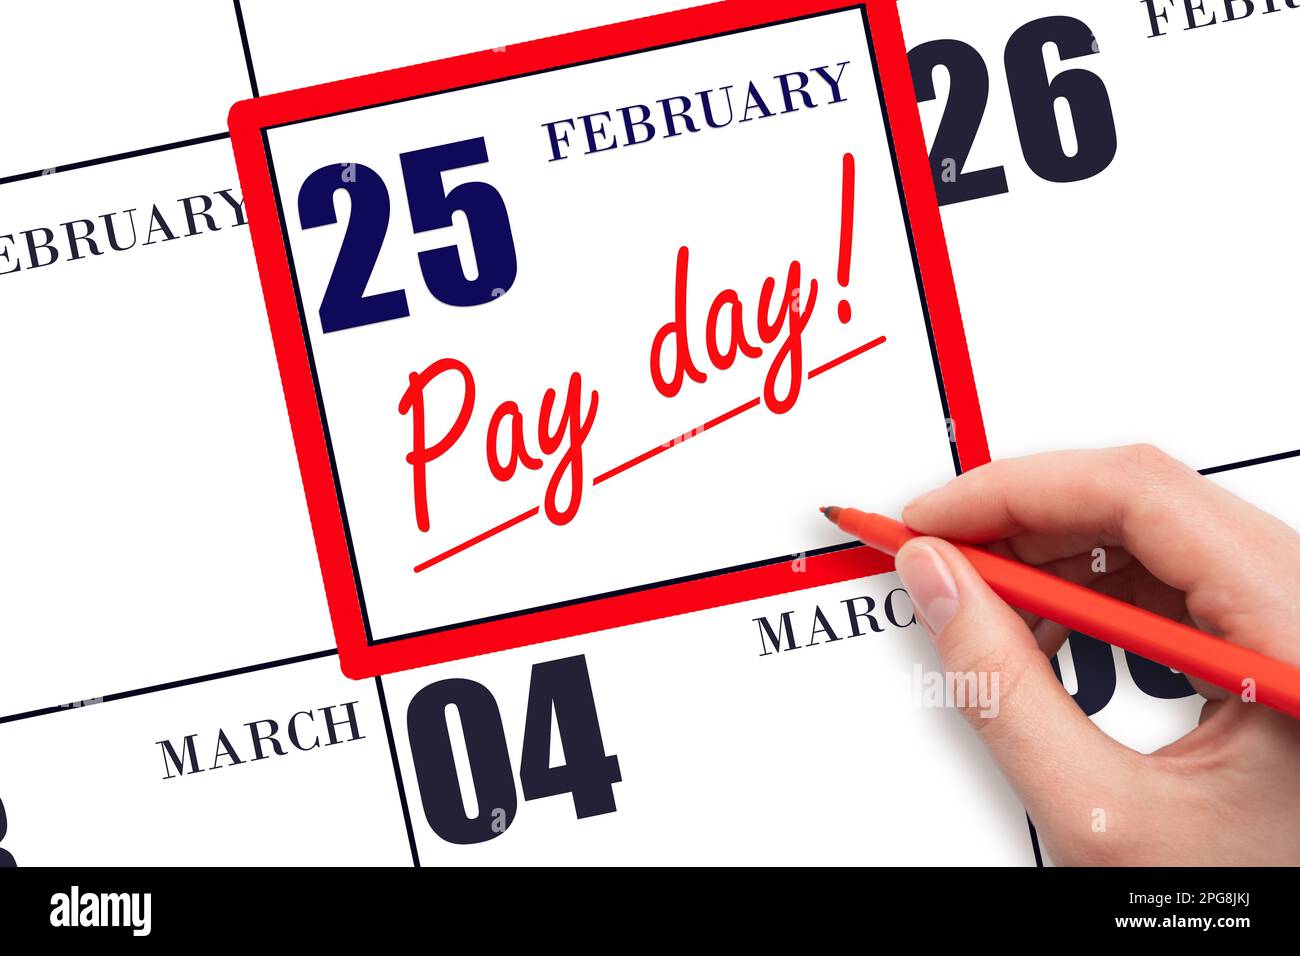 25th day of February. Hand writing text PAY DATE on calendar date February 25 and underline it. Payment due date. Reminder concept of payment. Winter Stock Photo